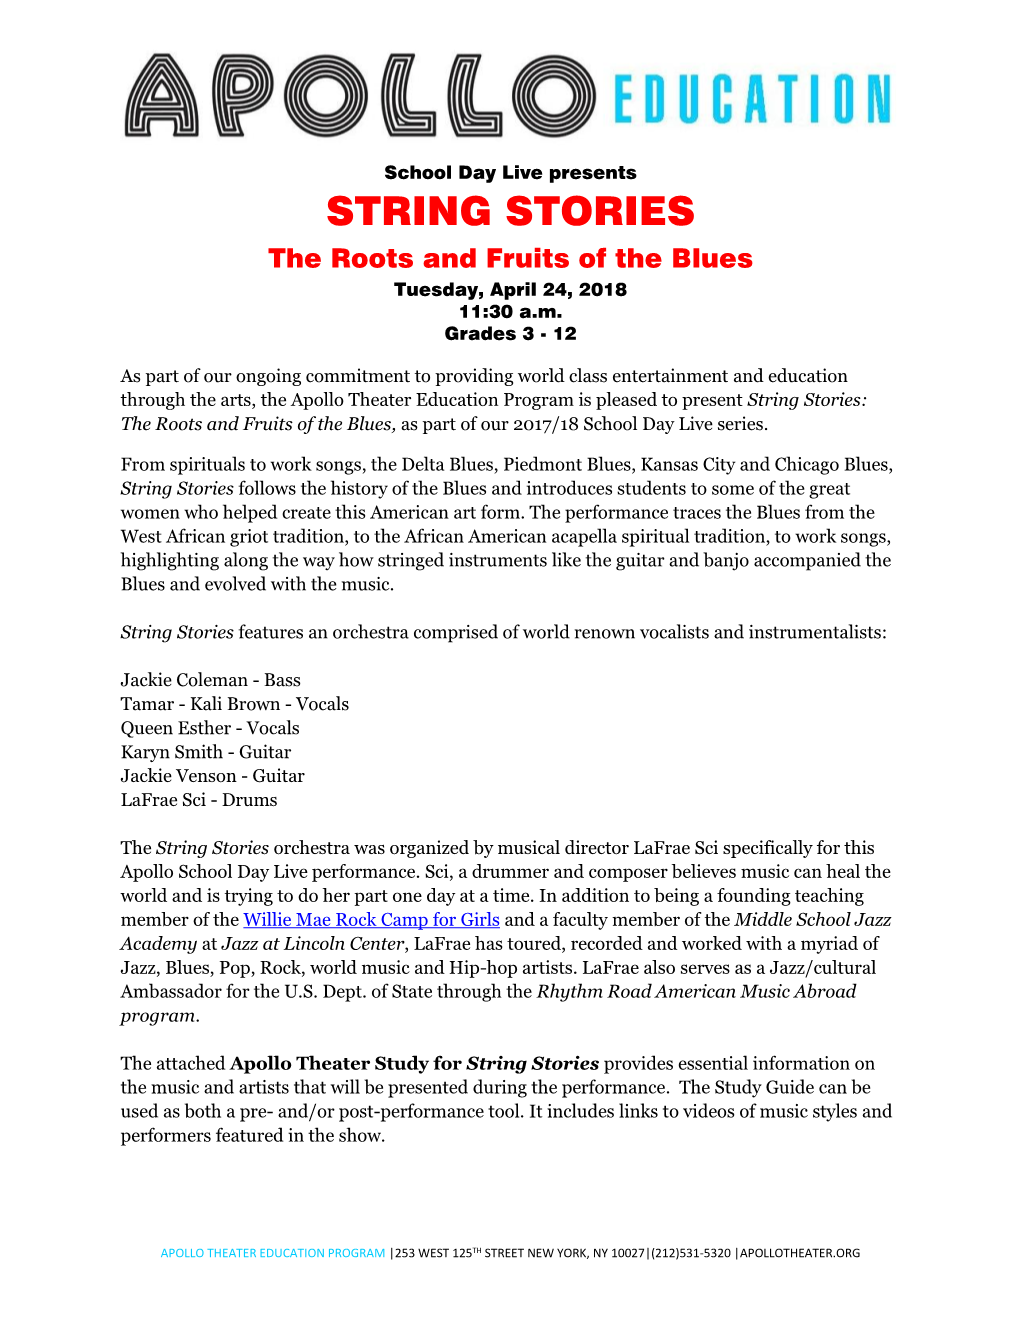 STRING STORIES the Roots and Fruits of the Blues Tuesday, April 24, 2018 11:30 A.M